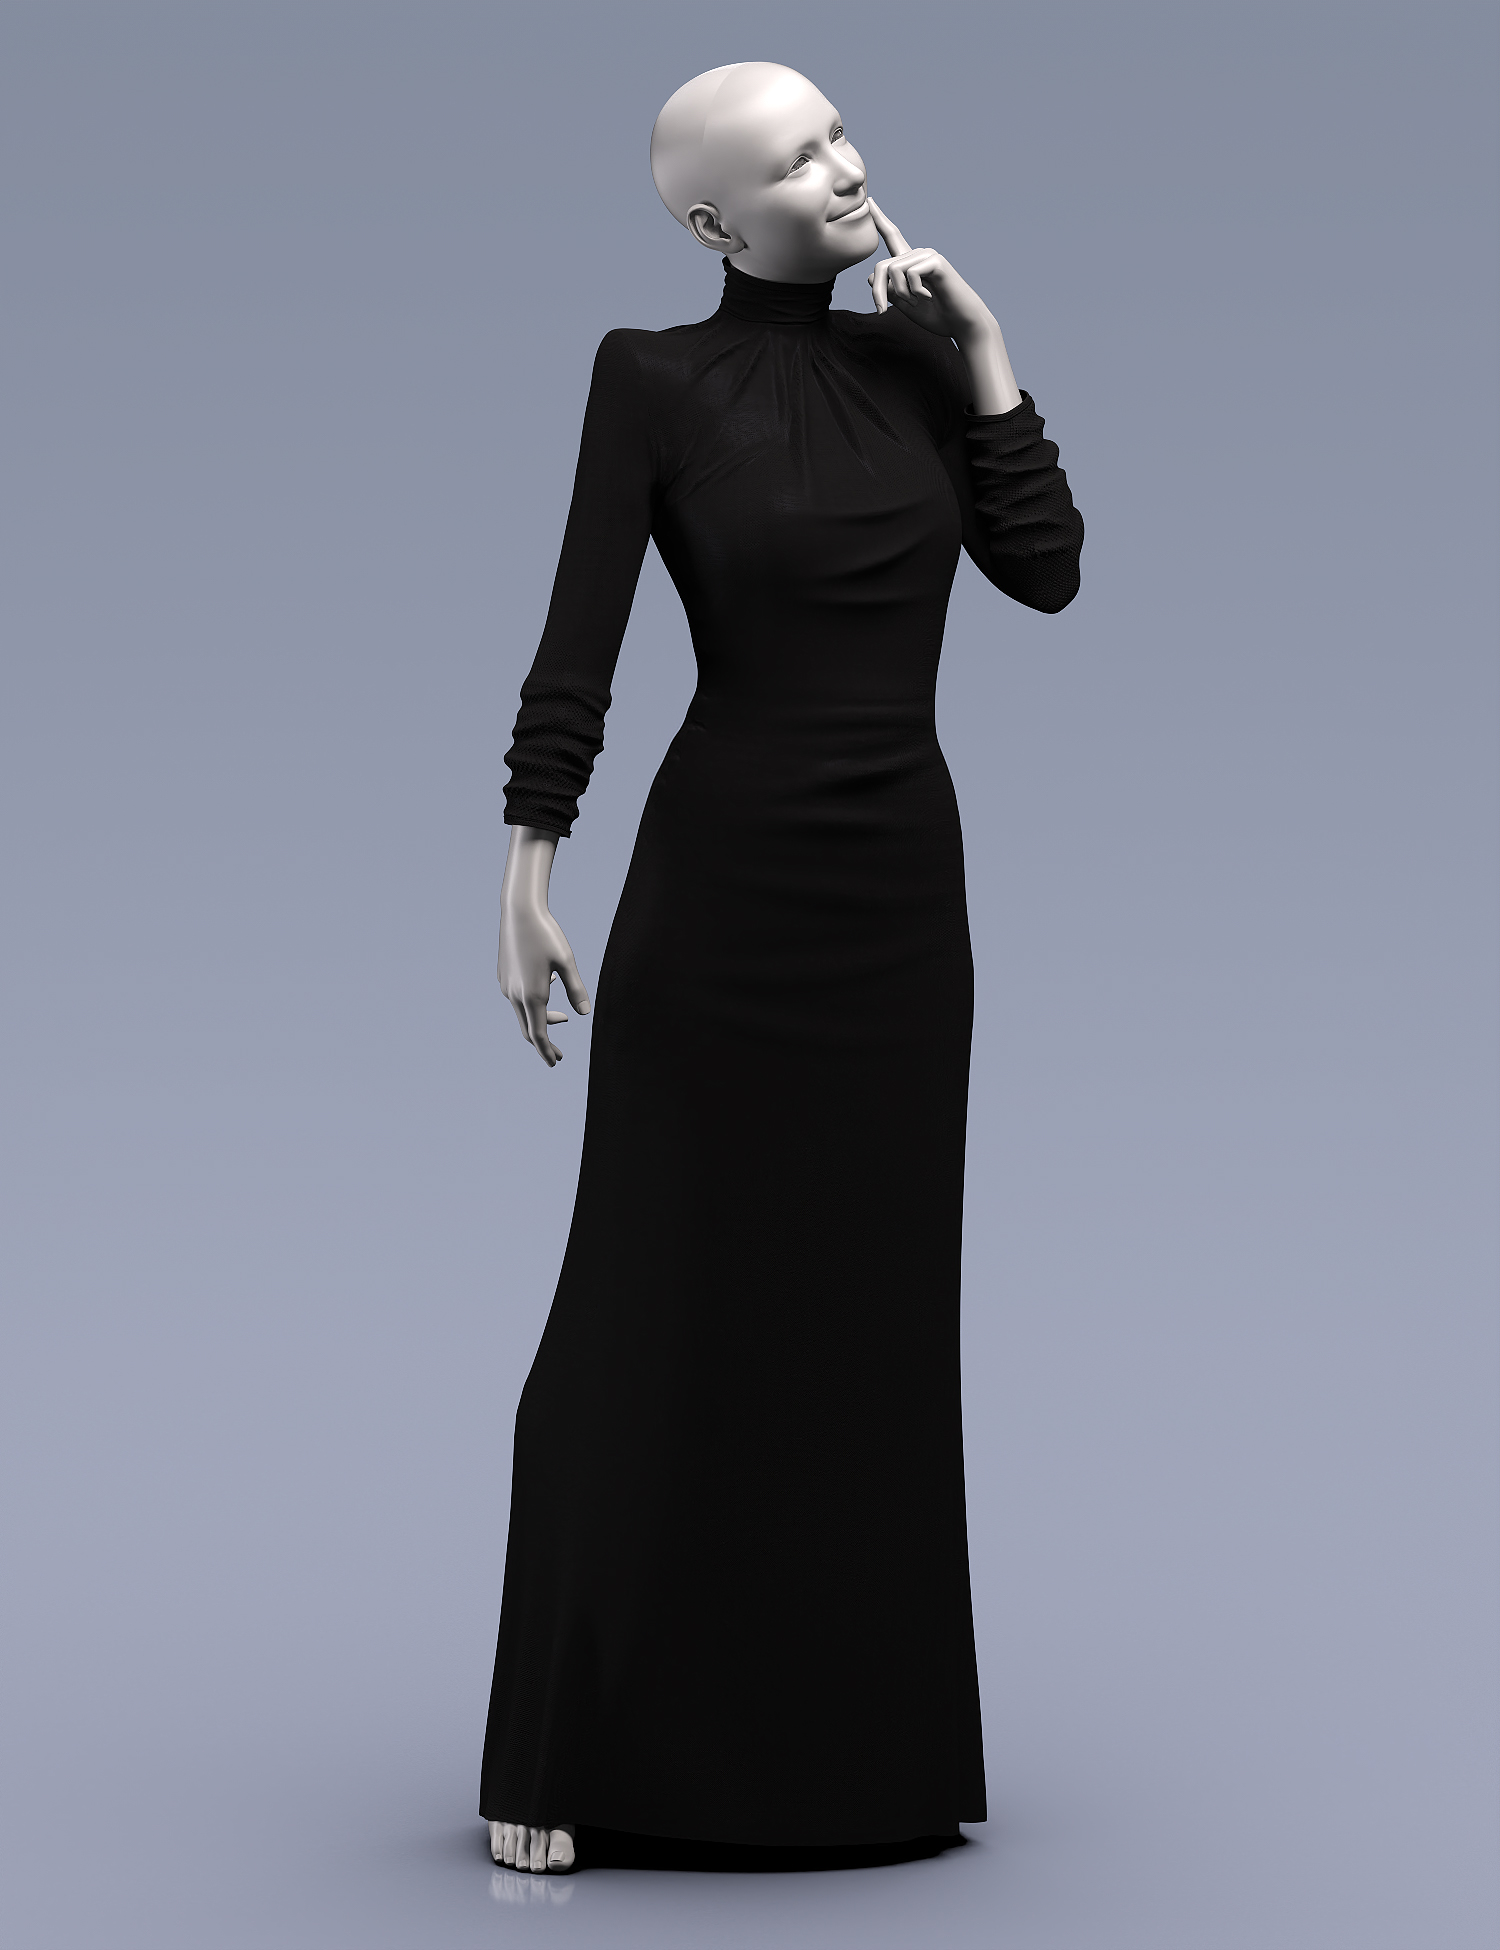 Black Long Dress Outfit dForce Dress for Genesis 8.1 Females by: 3DStyle, 3D Models by Daz 3D